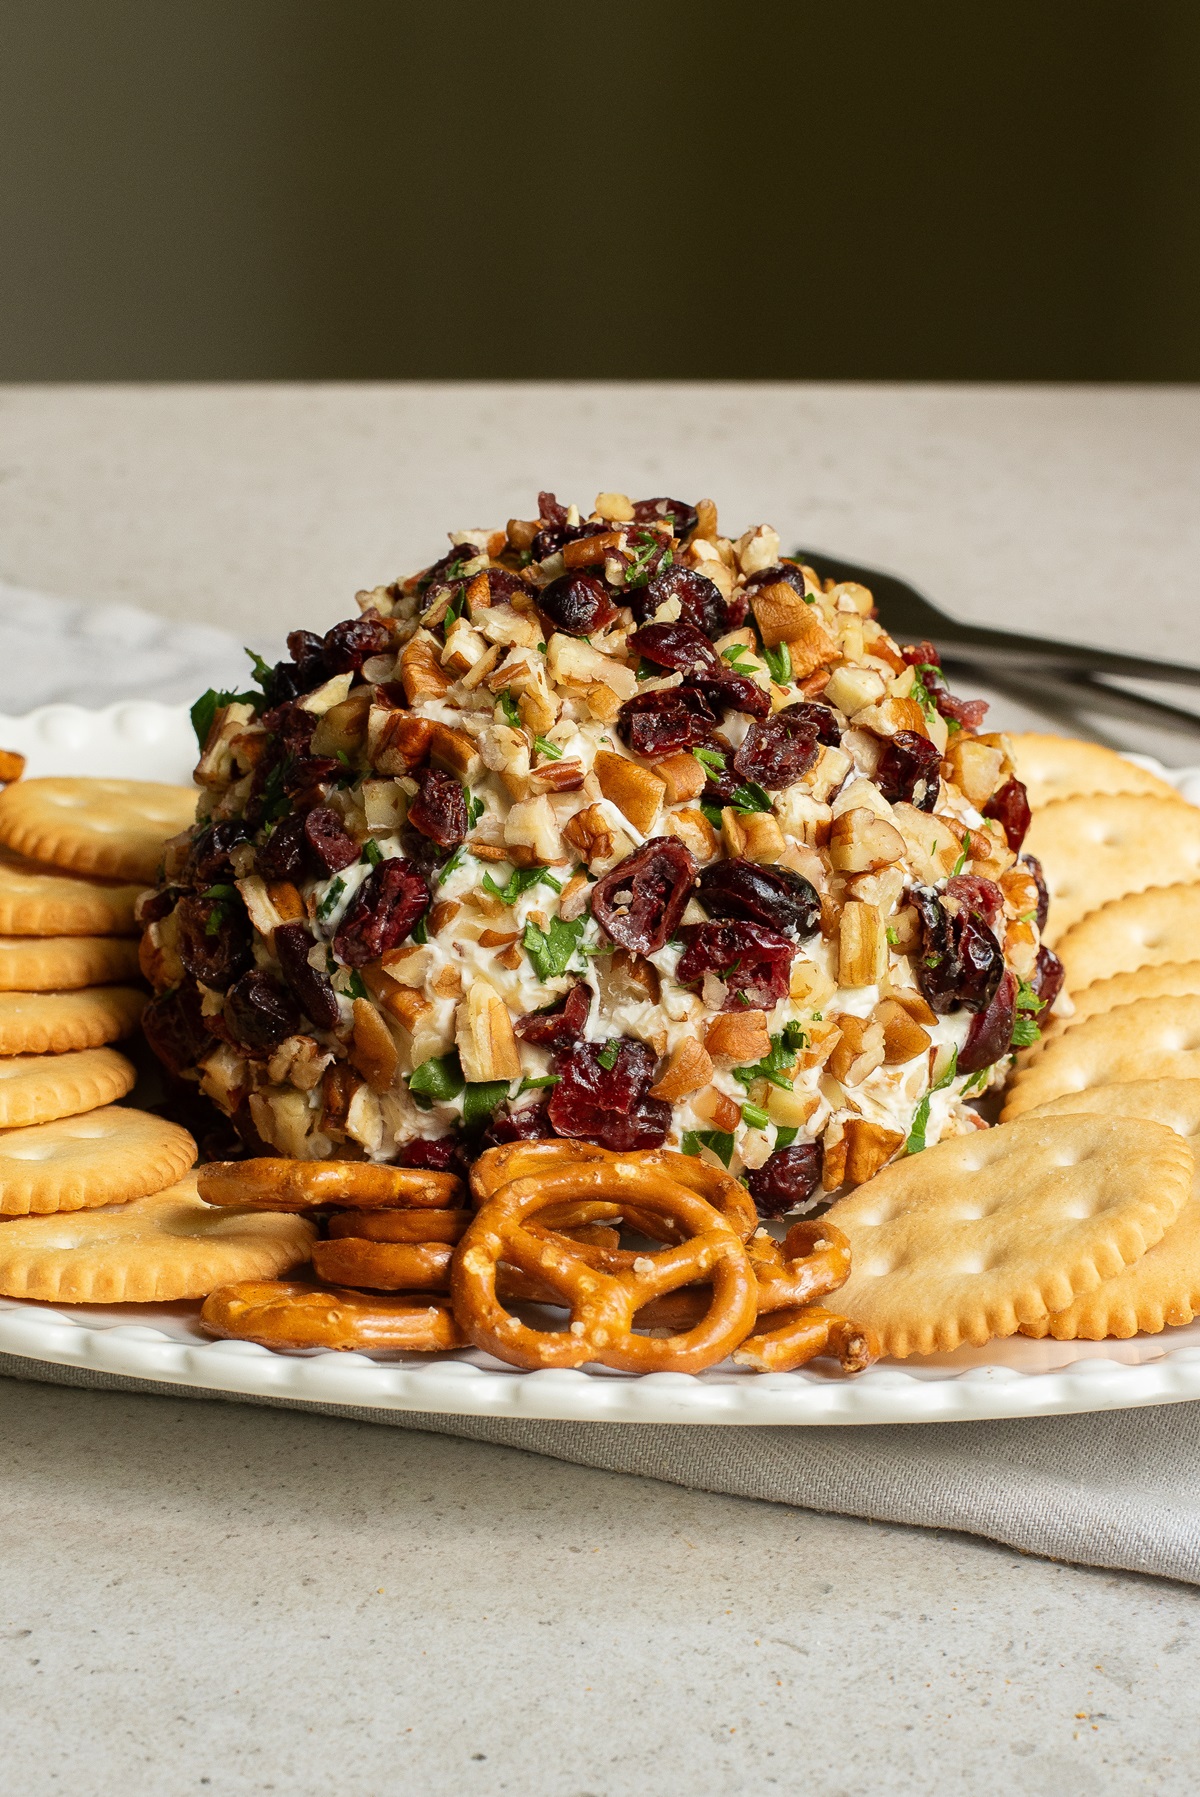 Side view of a cream cheese and cheddar cheese ball with crackers.